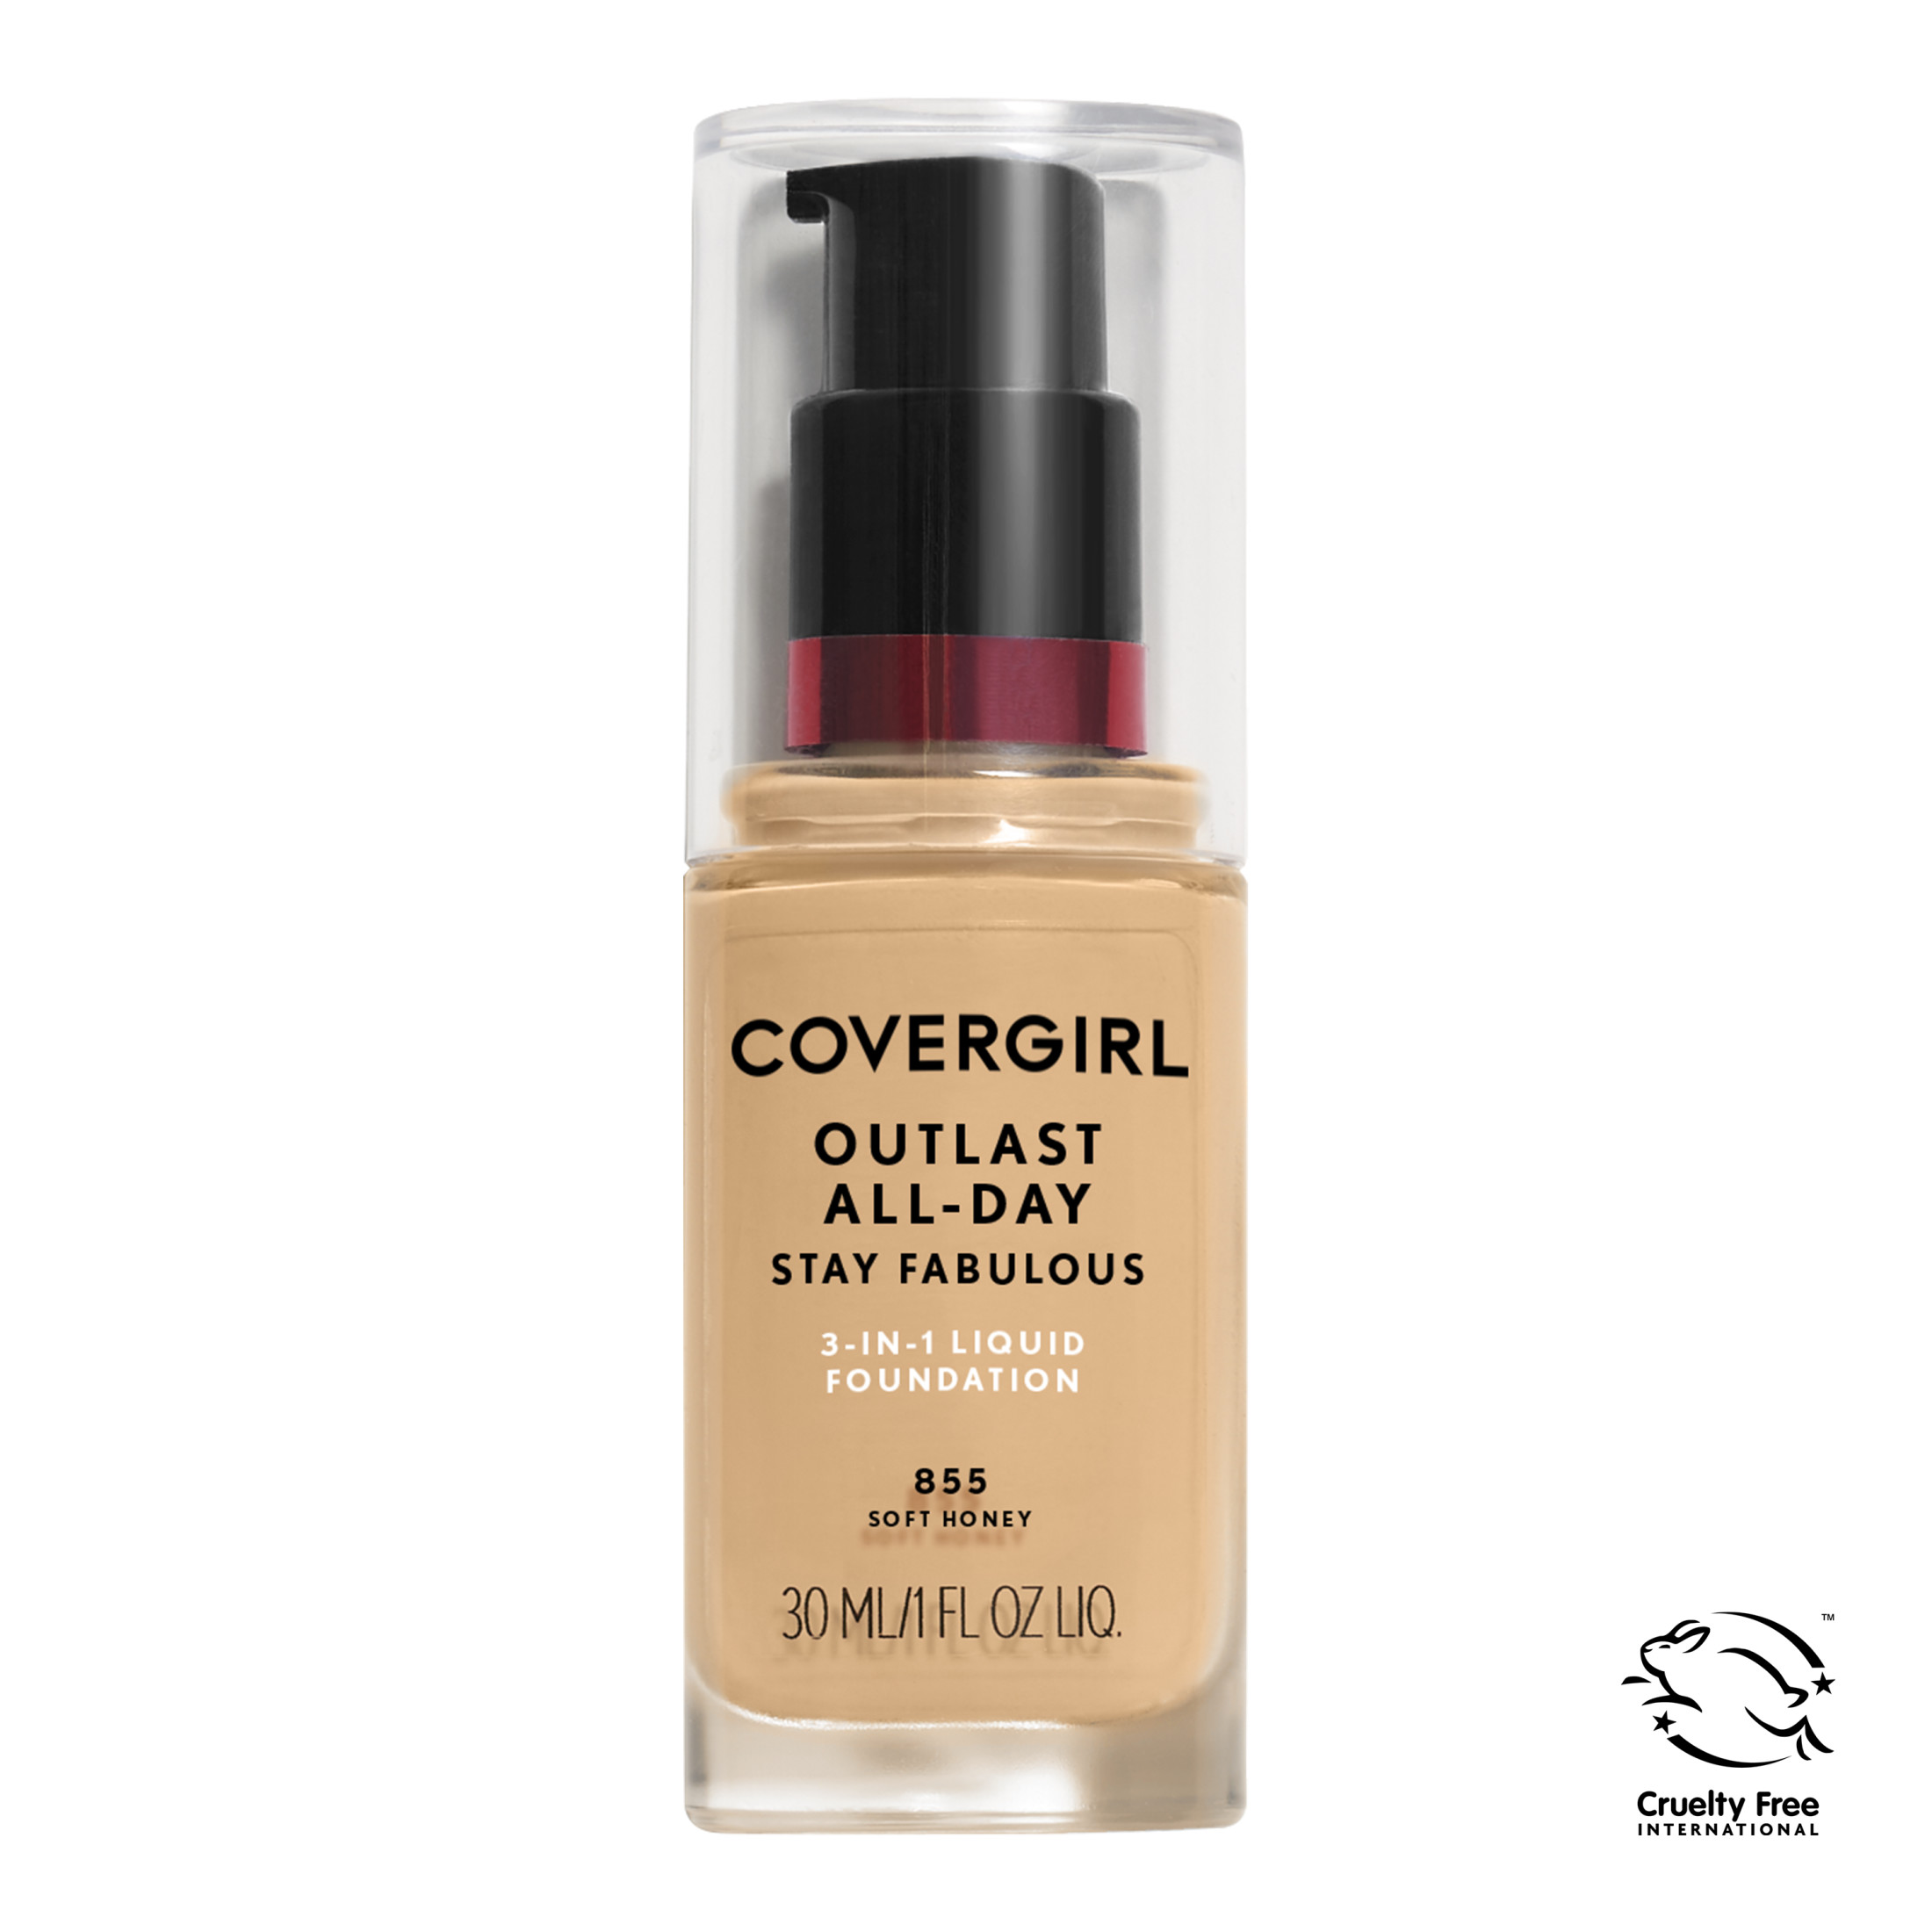 COVERGIRL Outlast All-Day Stay Fabulous 3-in-1 Foundation, 810 Classic Ivory, 1 oz - image 1 of 11